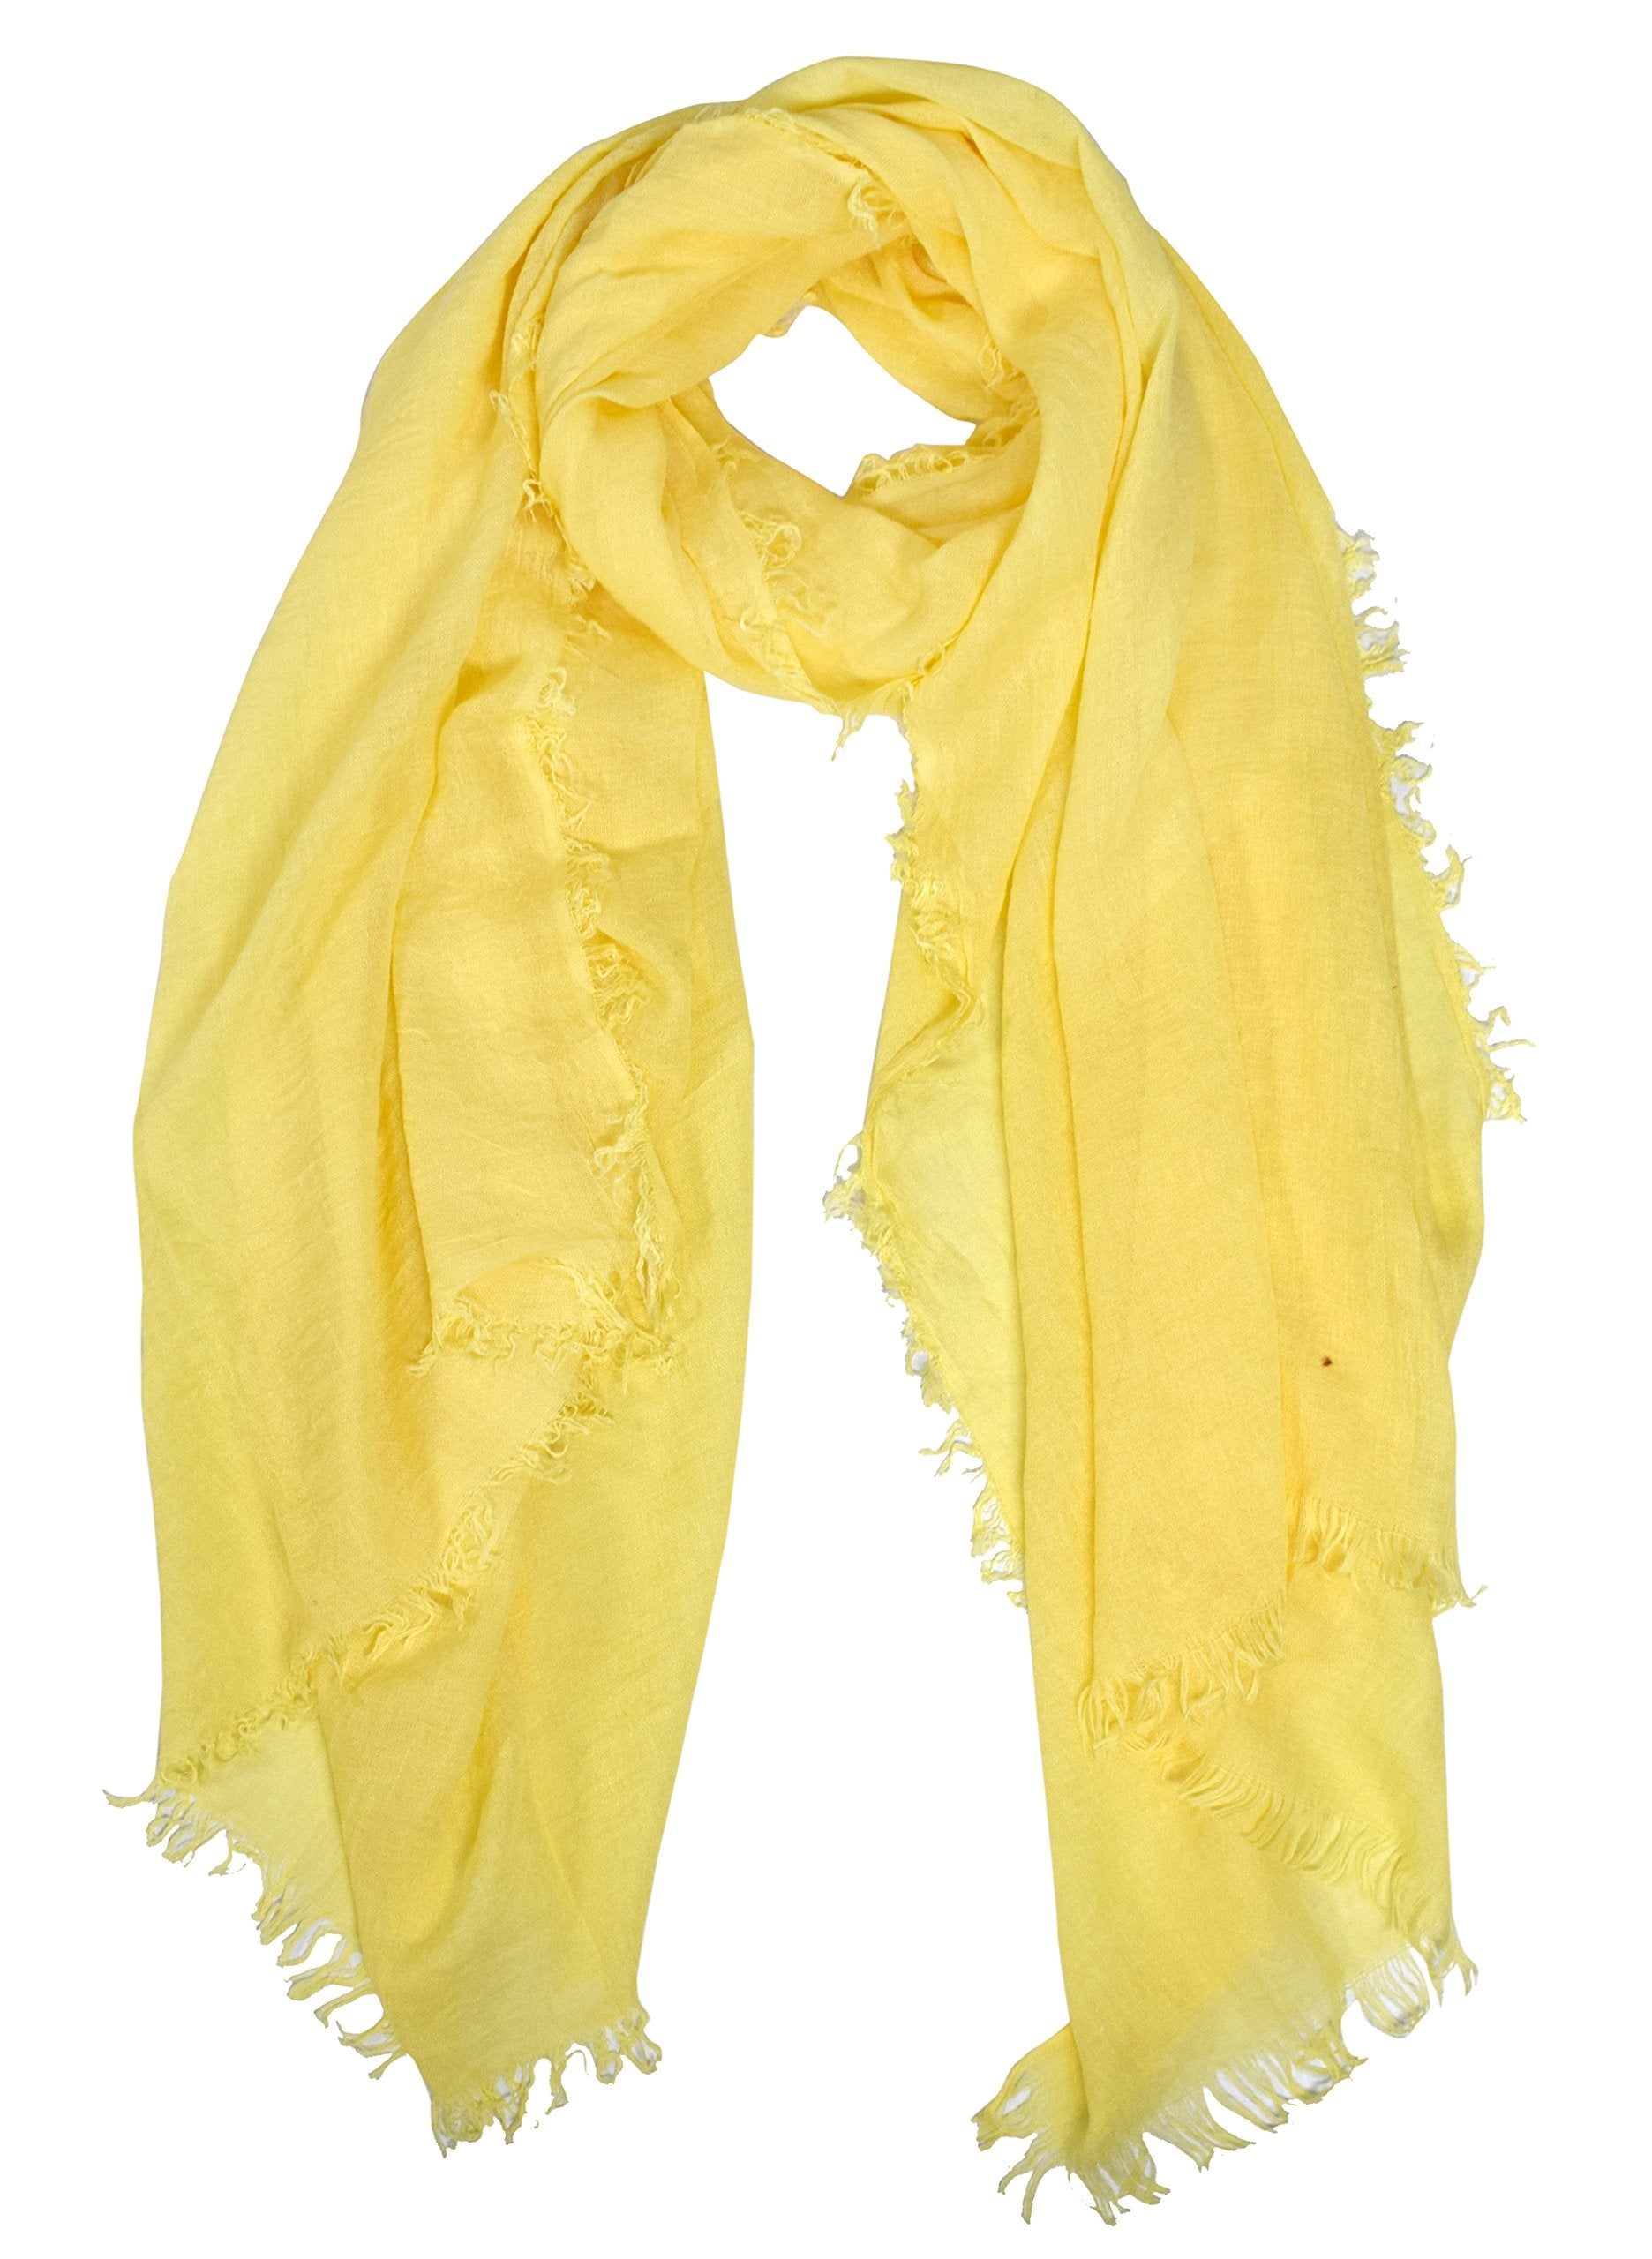 Fringed Yellow Light Weight Sheer Over Sized Scarf Sarong Beach Wrap